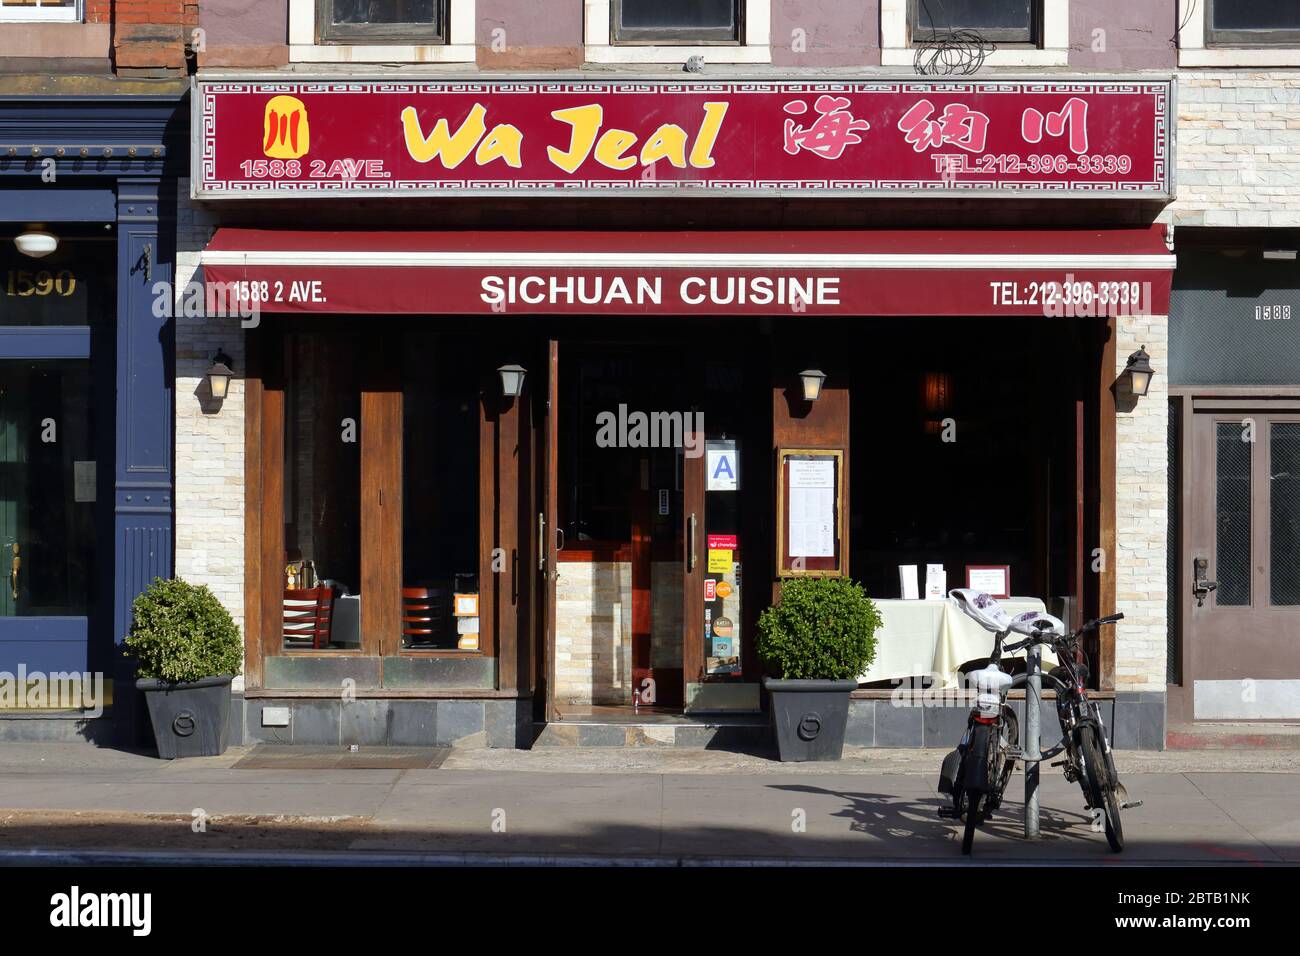 Wa Jeal, 1588 2nd Avenue, New York, NYC storefront photo of a Chinese Sichuan restaurant in the Upper East Side of Manhattan Stock Photo